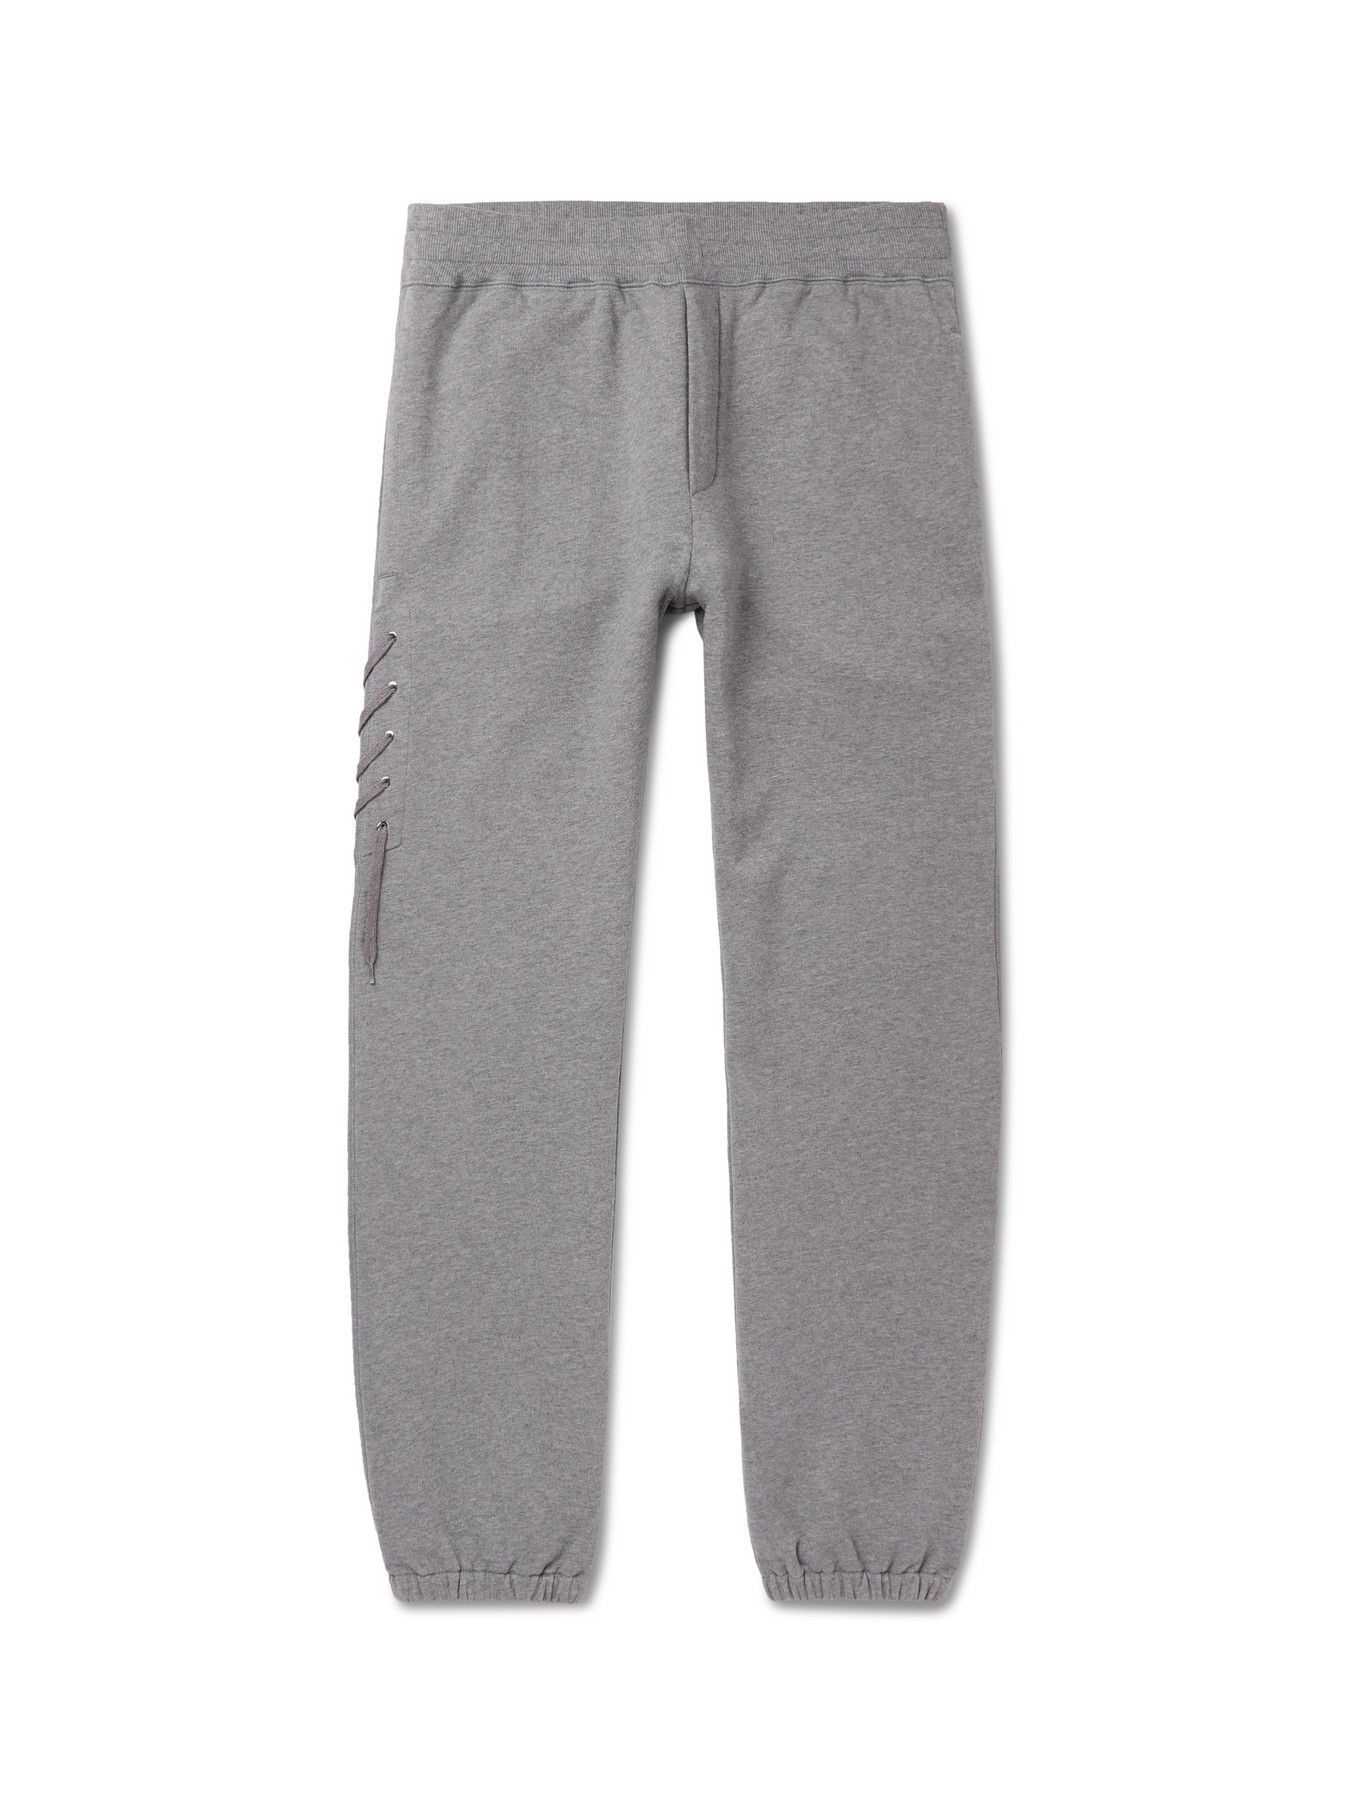 CRAIG GREEN - Tapered Lace-Detailed Cotton-Jersey Sweatpants - Gray ...